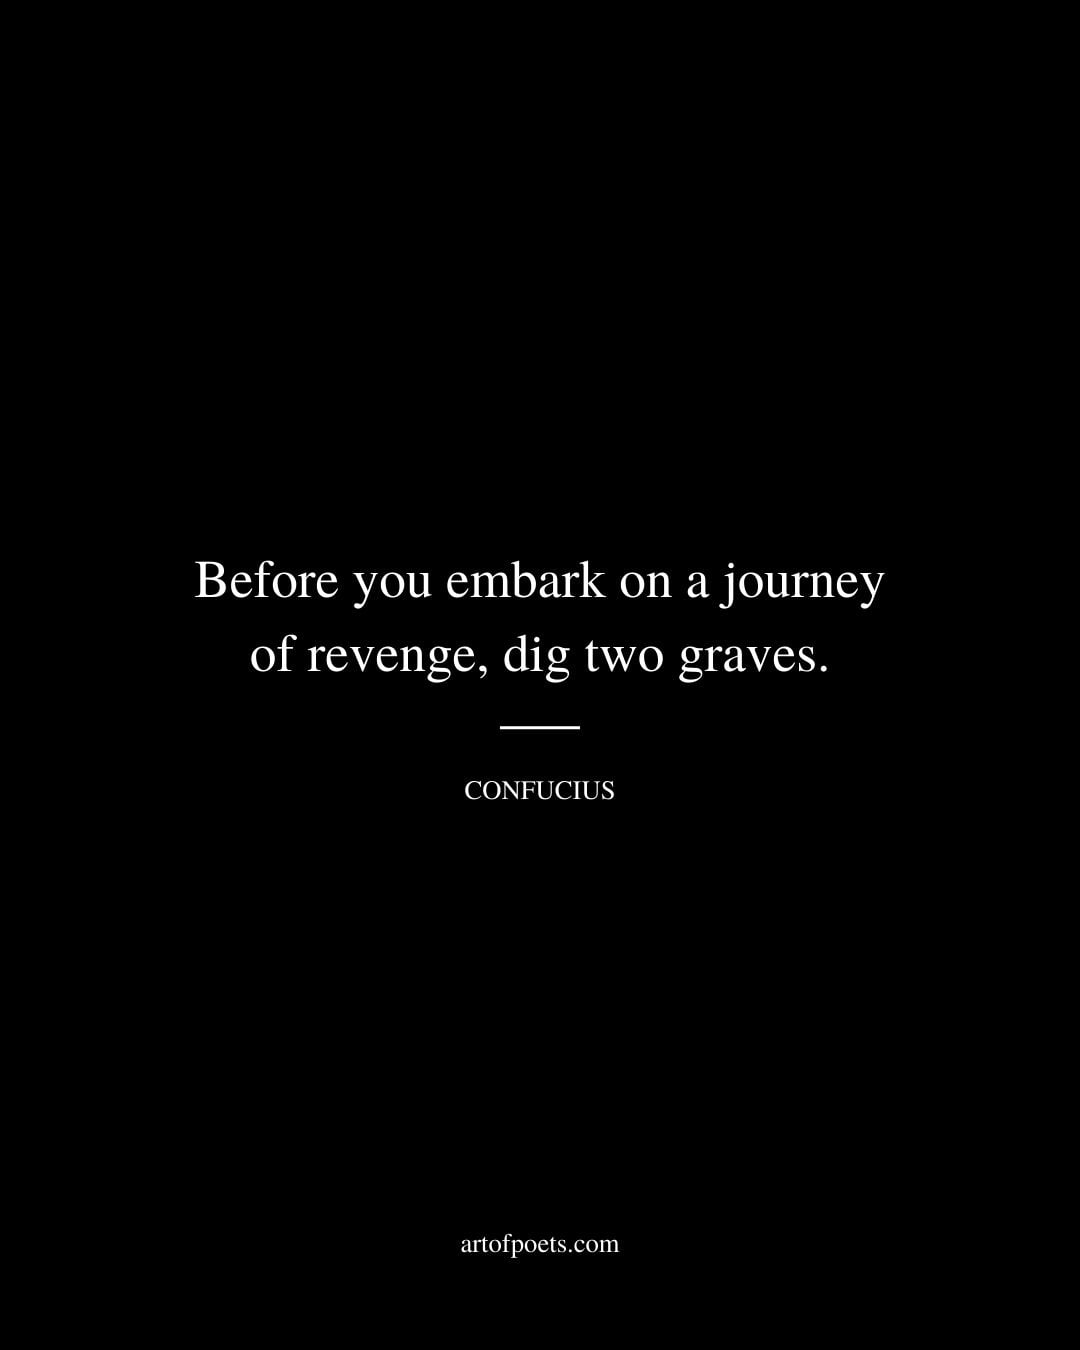 Before you embark on a journey of revenge dig two graves